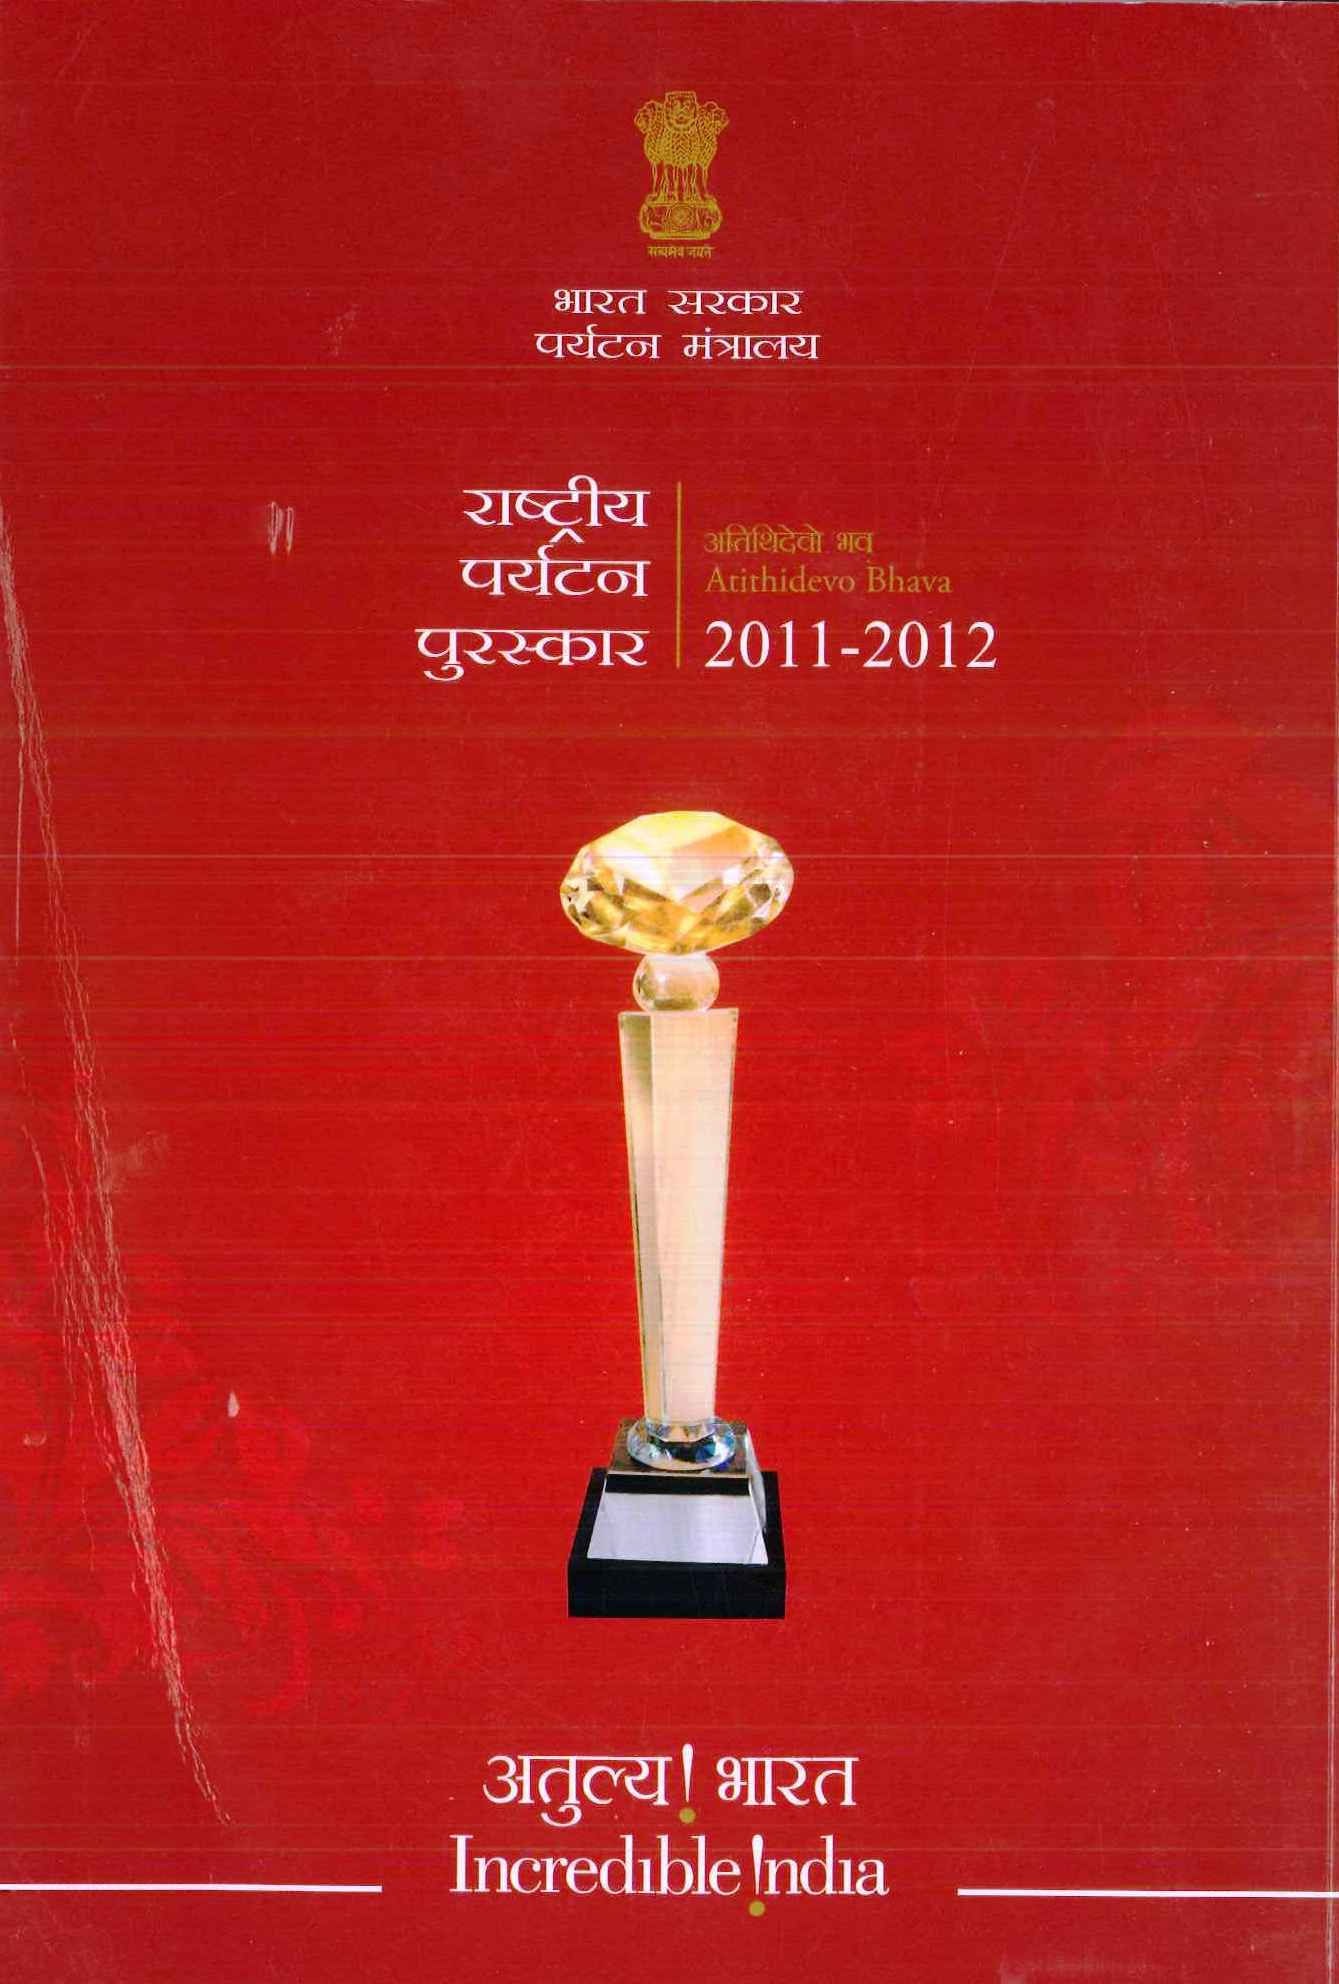 Picture of Cover page of Citation Book for National Tourism Awards 2011-2012